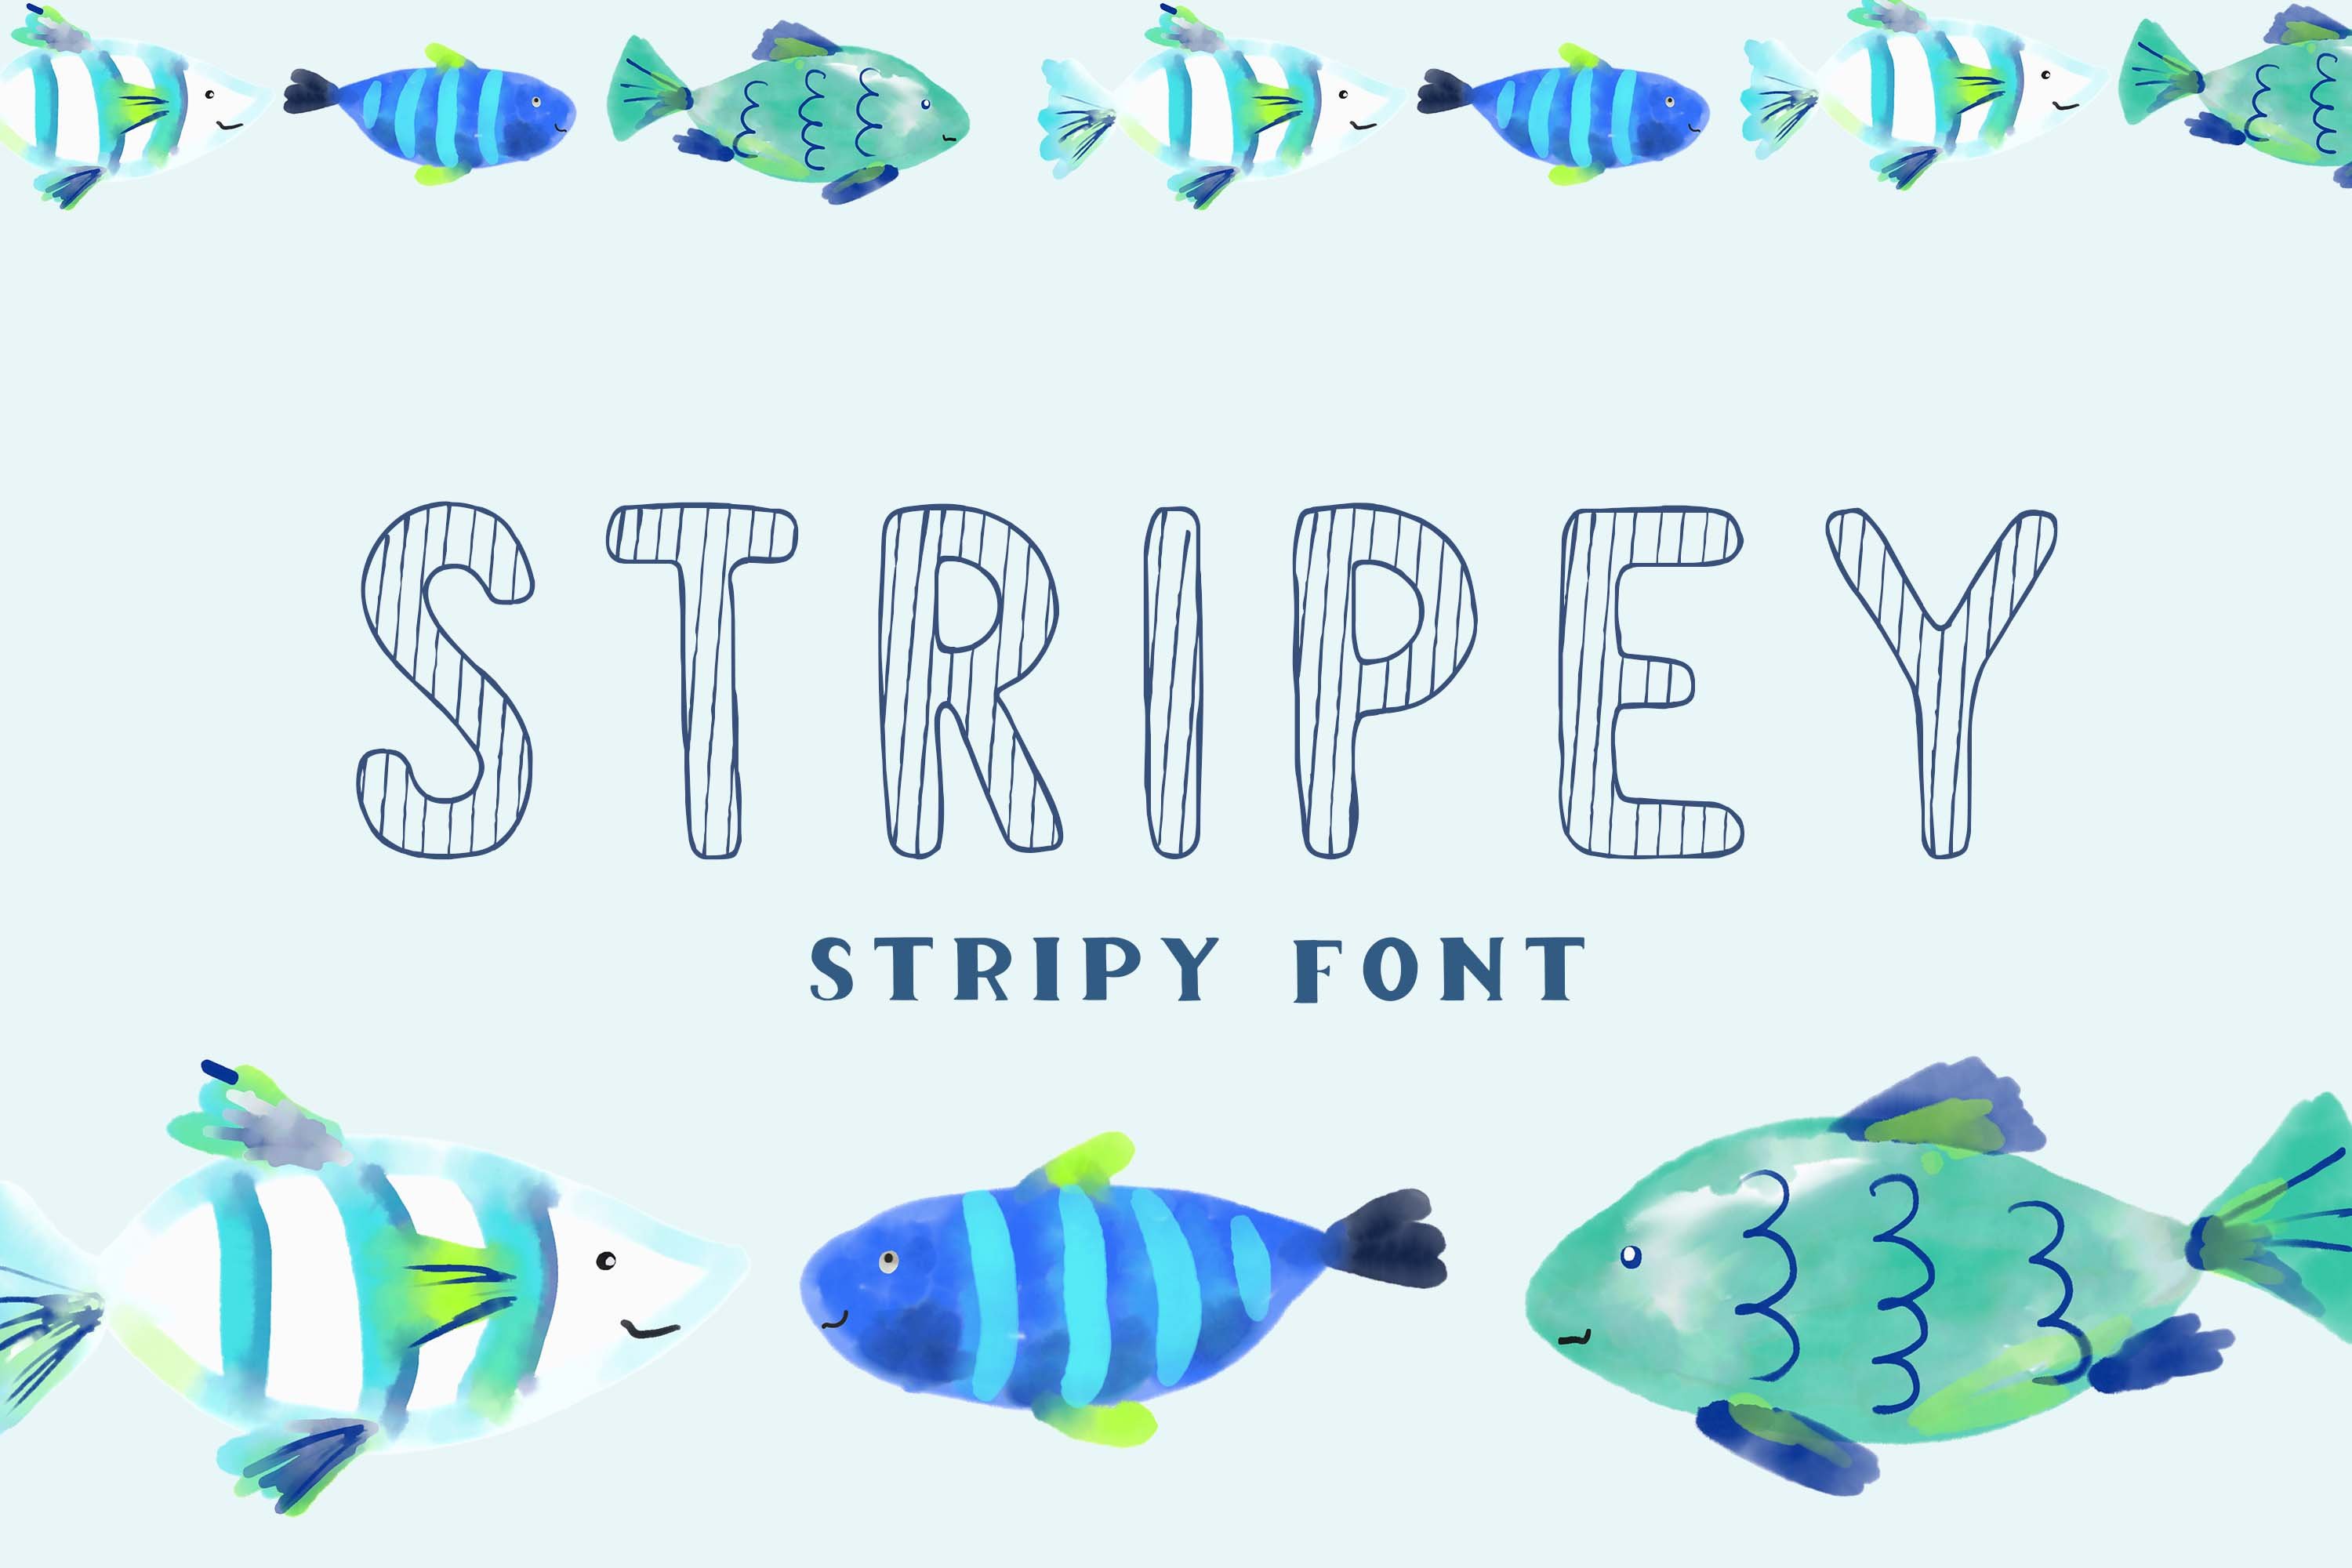 Stripey - display stripy font cover image.